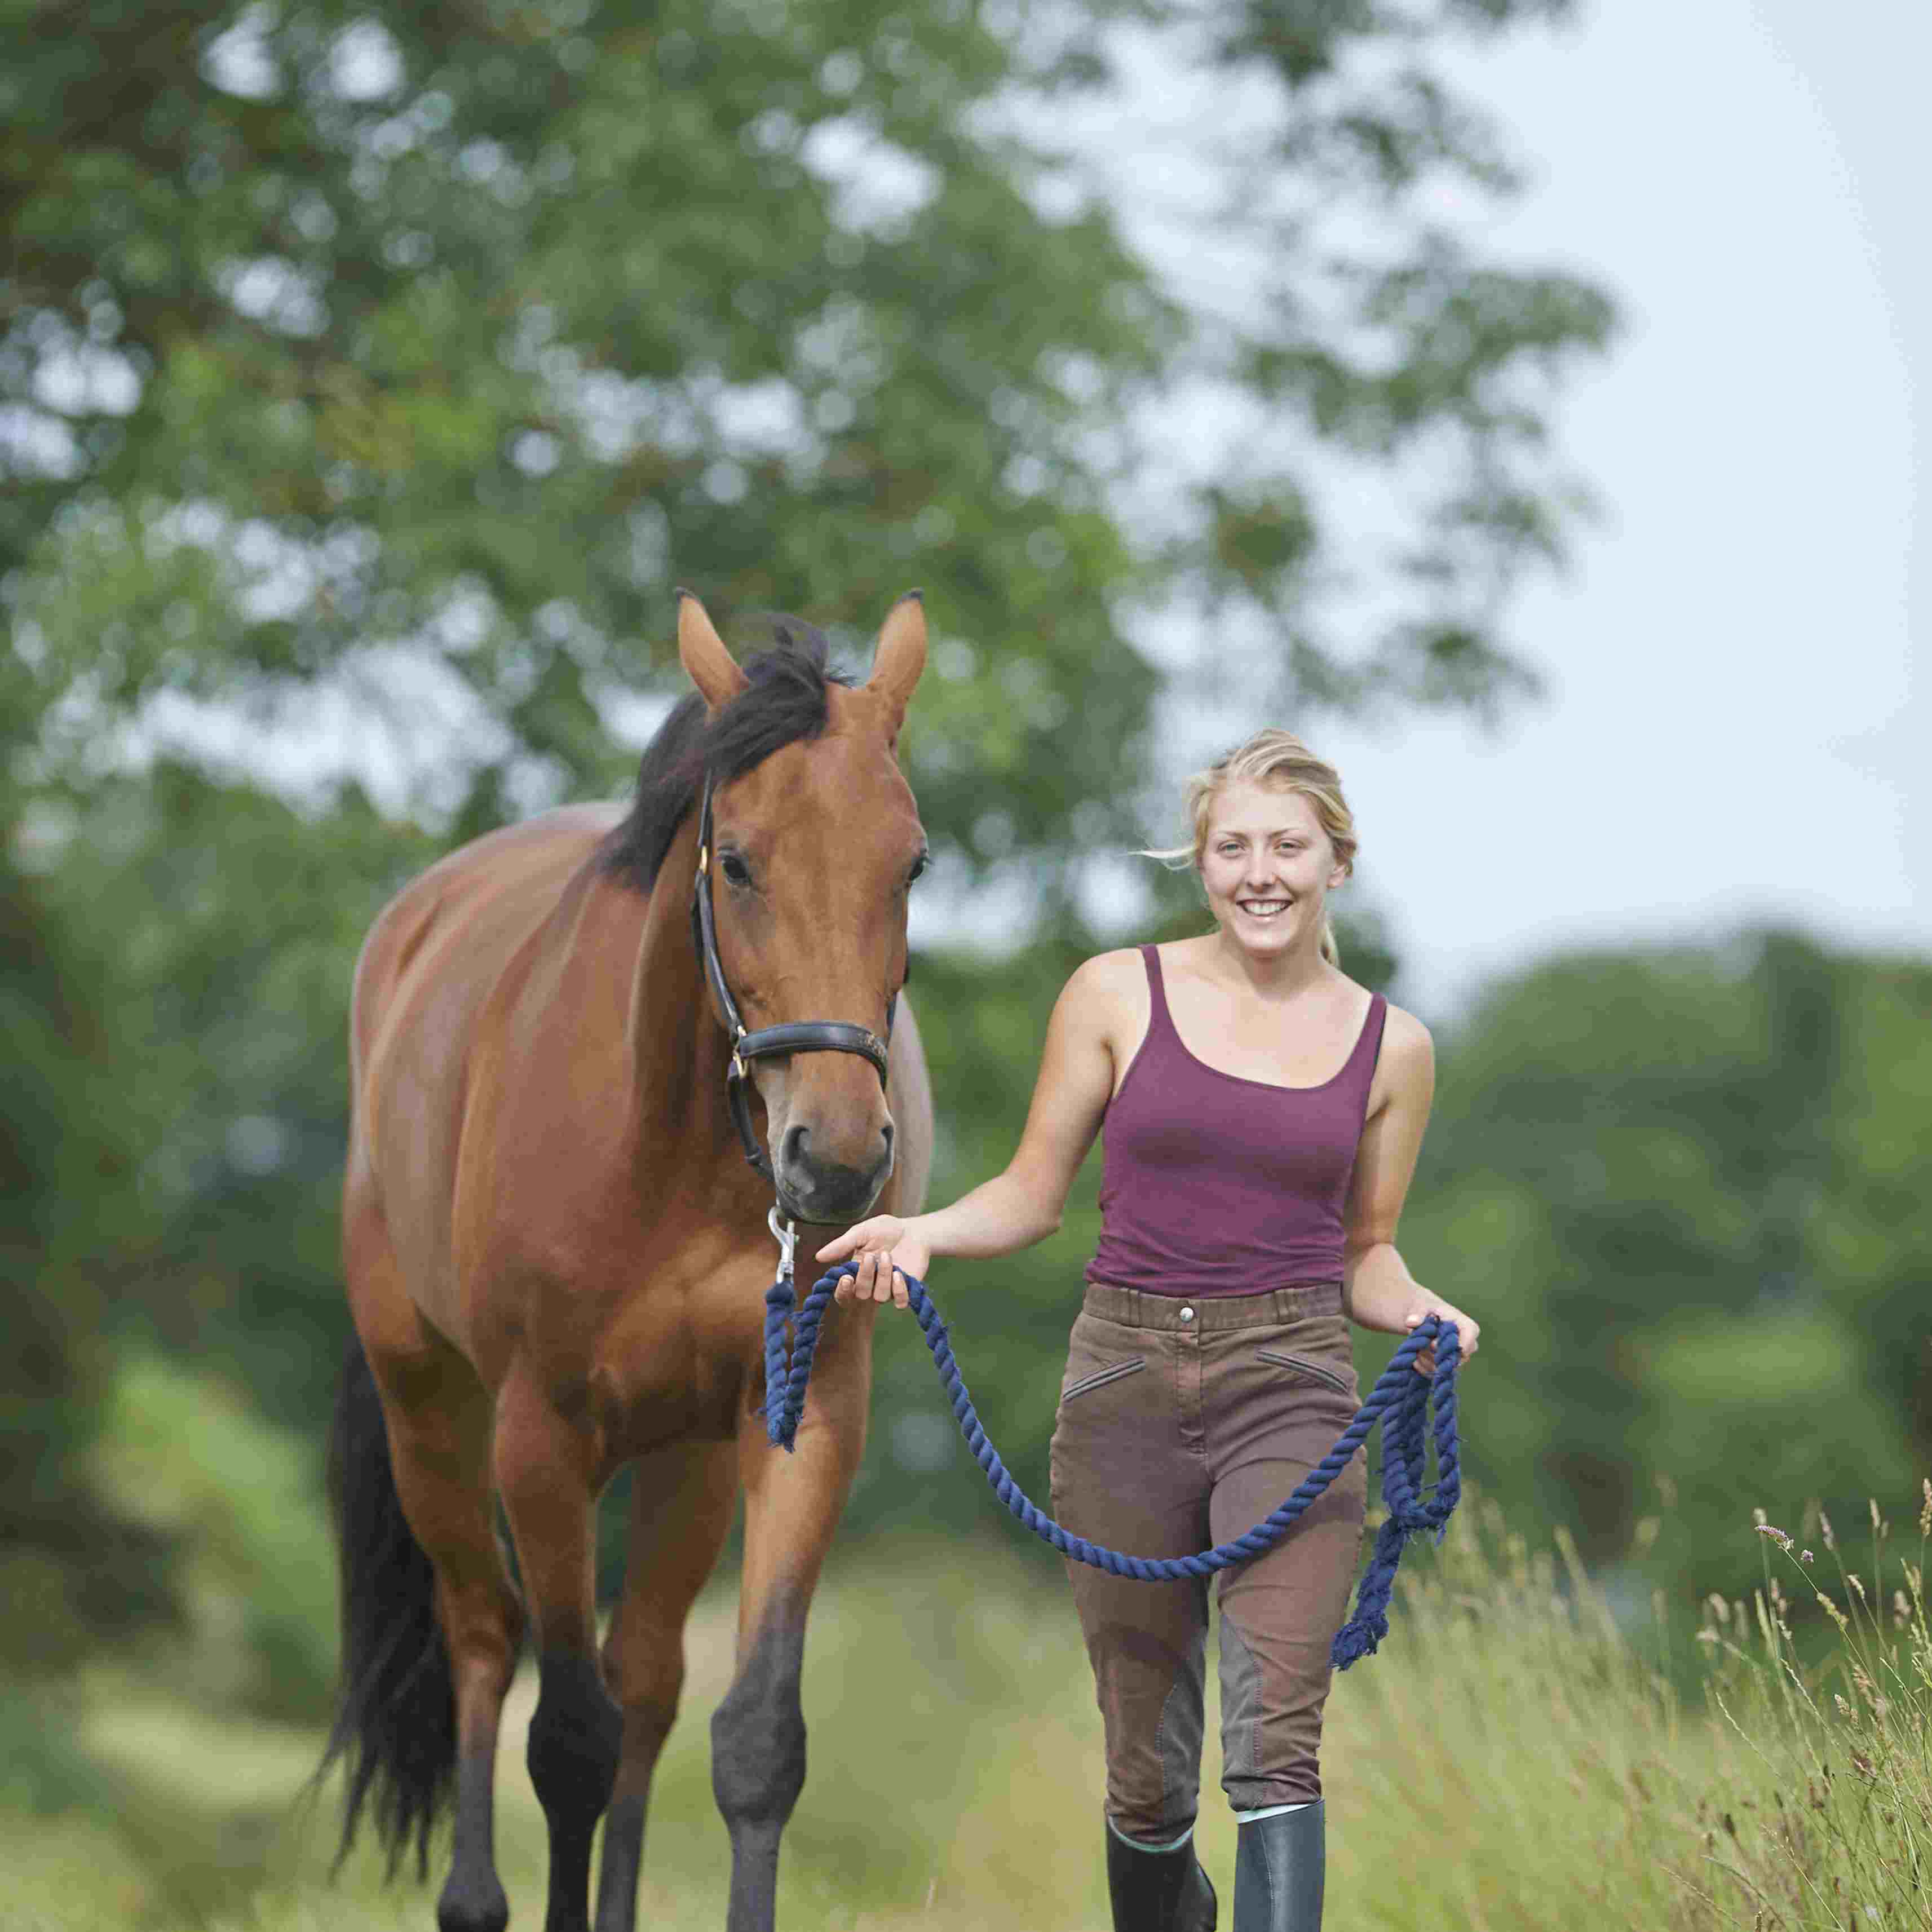 Young woman walking with horse in countryside.